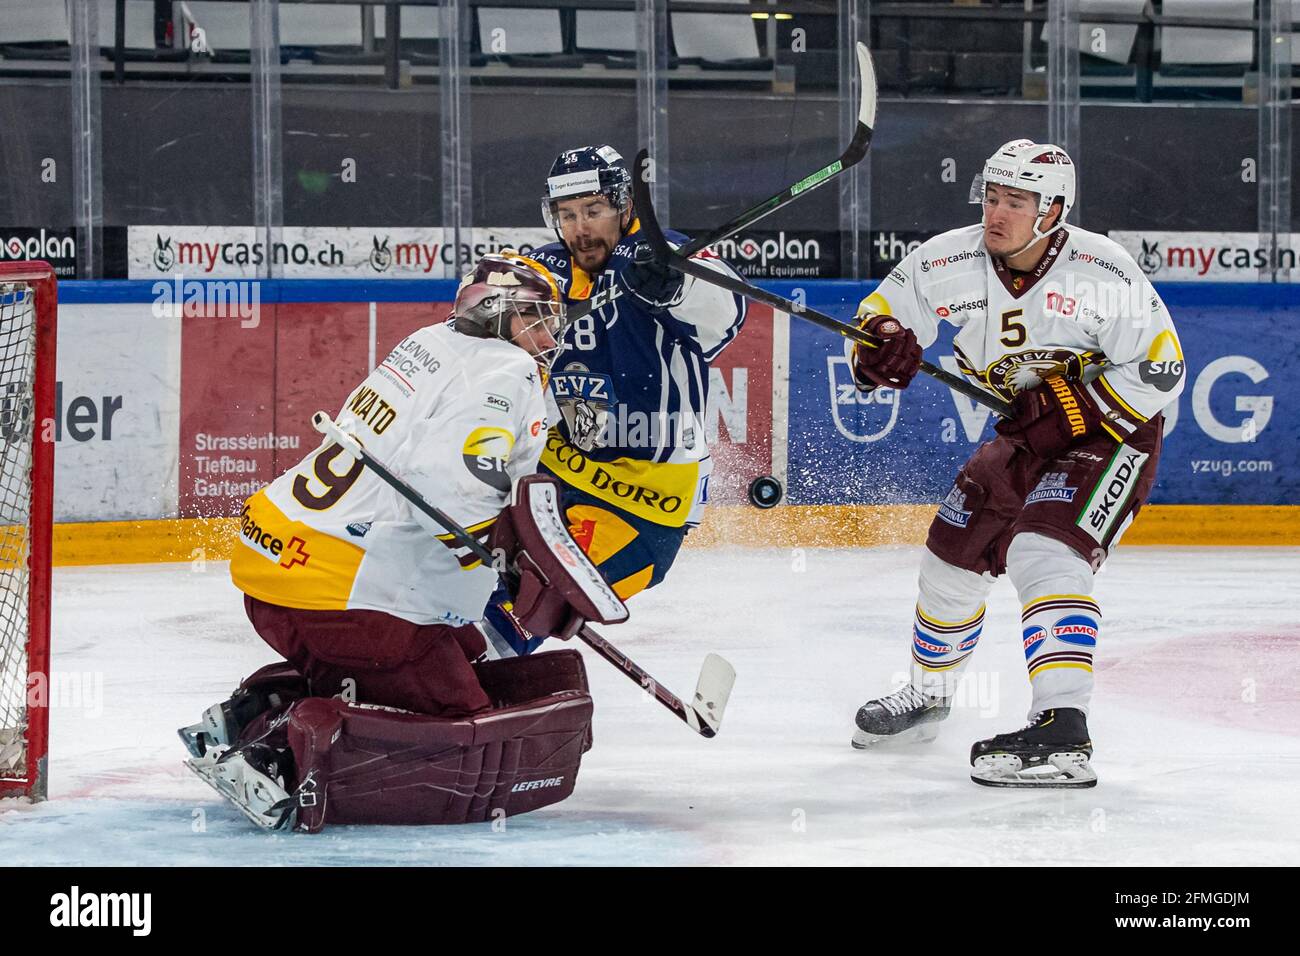 # 5 Enzo Guebey (Geneva) and # 79 goalkeeper Daniel Manzato (Geneva) stop Yannick-Lennart Albrecht # 28 (EV Zug) during the National League Playoff Final ice hockey game 3 between EV Zug and Geneve-Servette HC on 07.05.2021 in the Bossard Arena in Zug. (Switzerland/Croatia OUT) Stock Photo